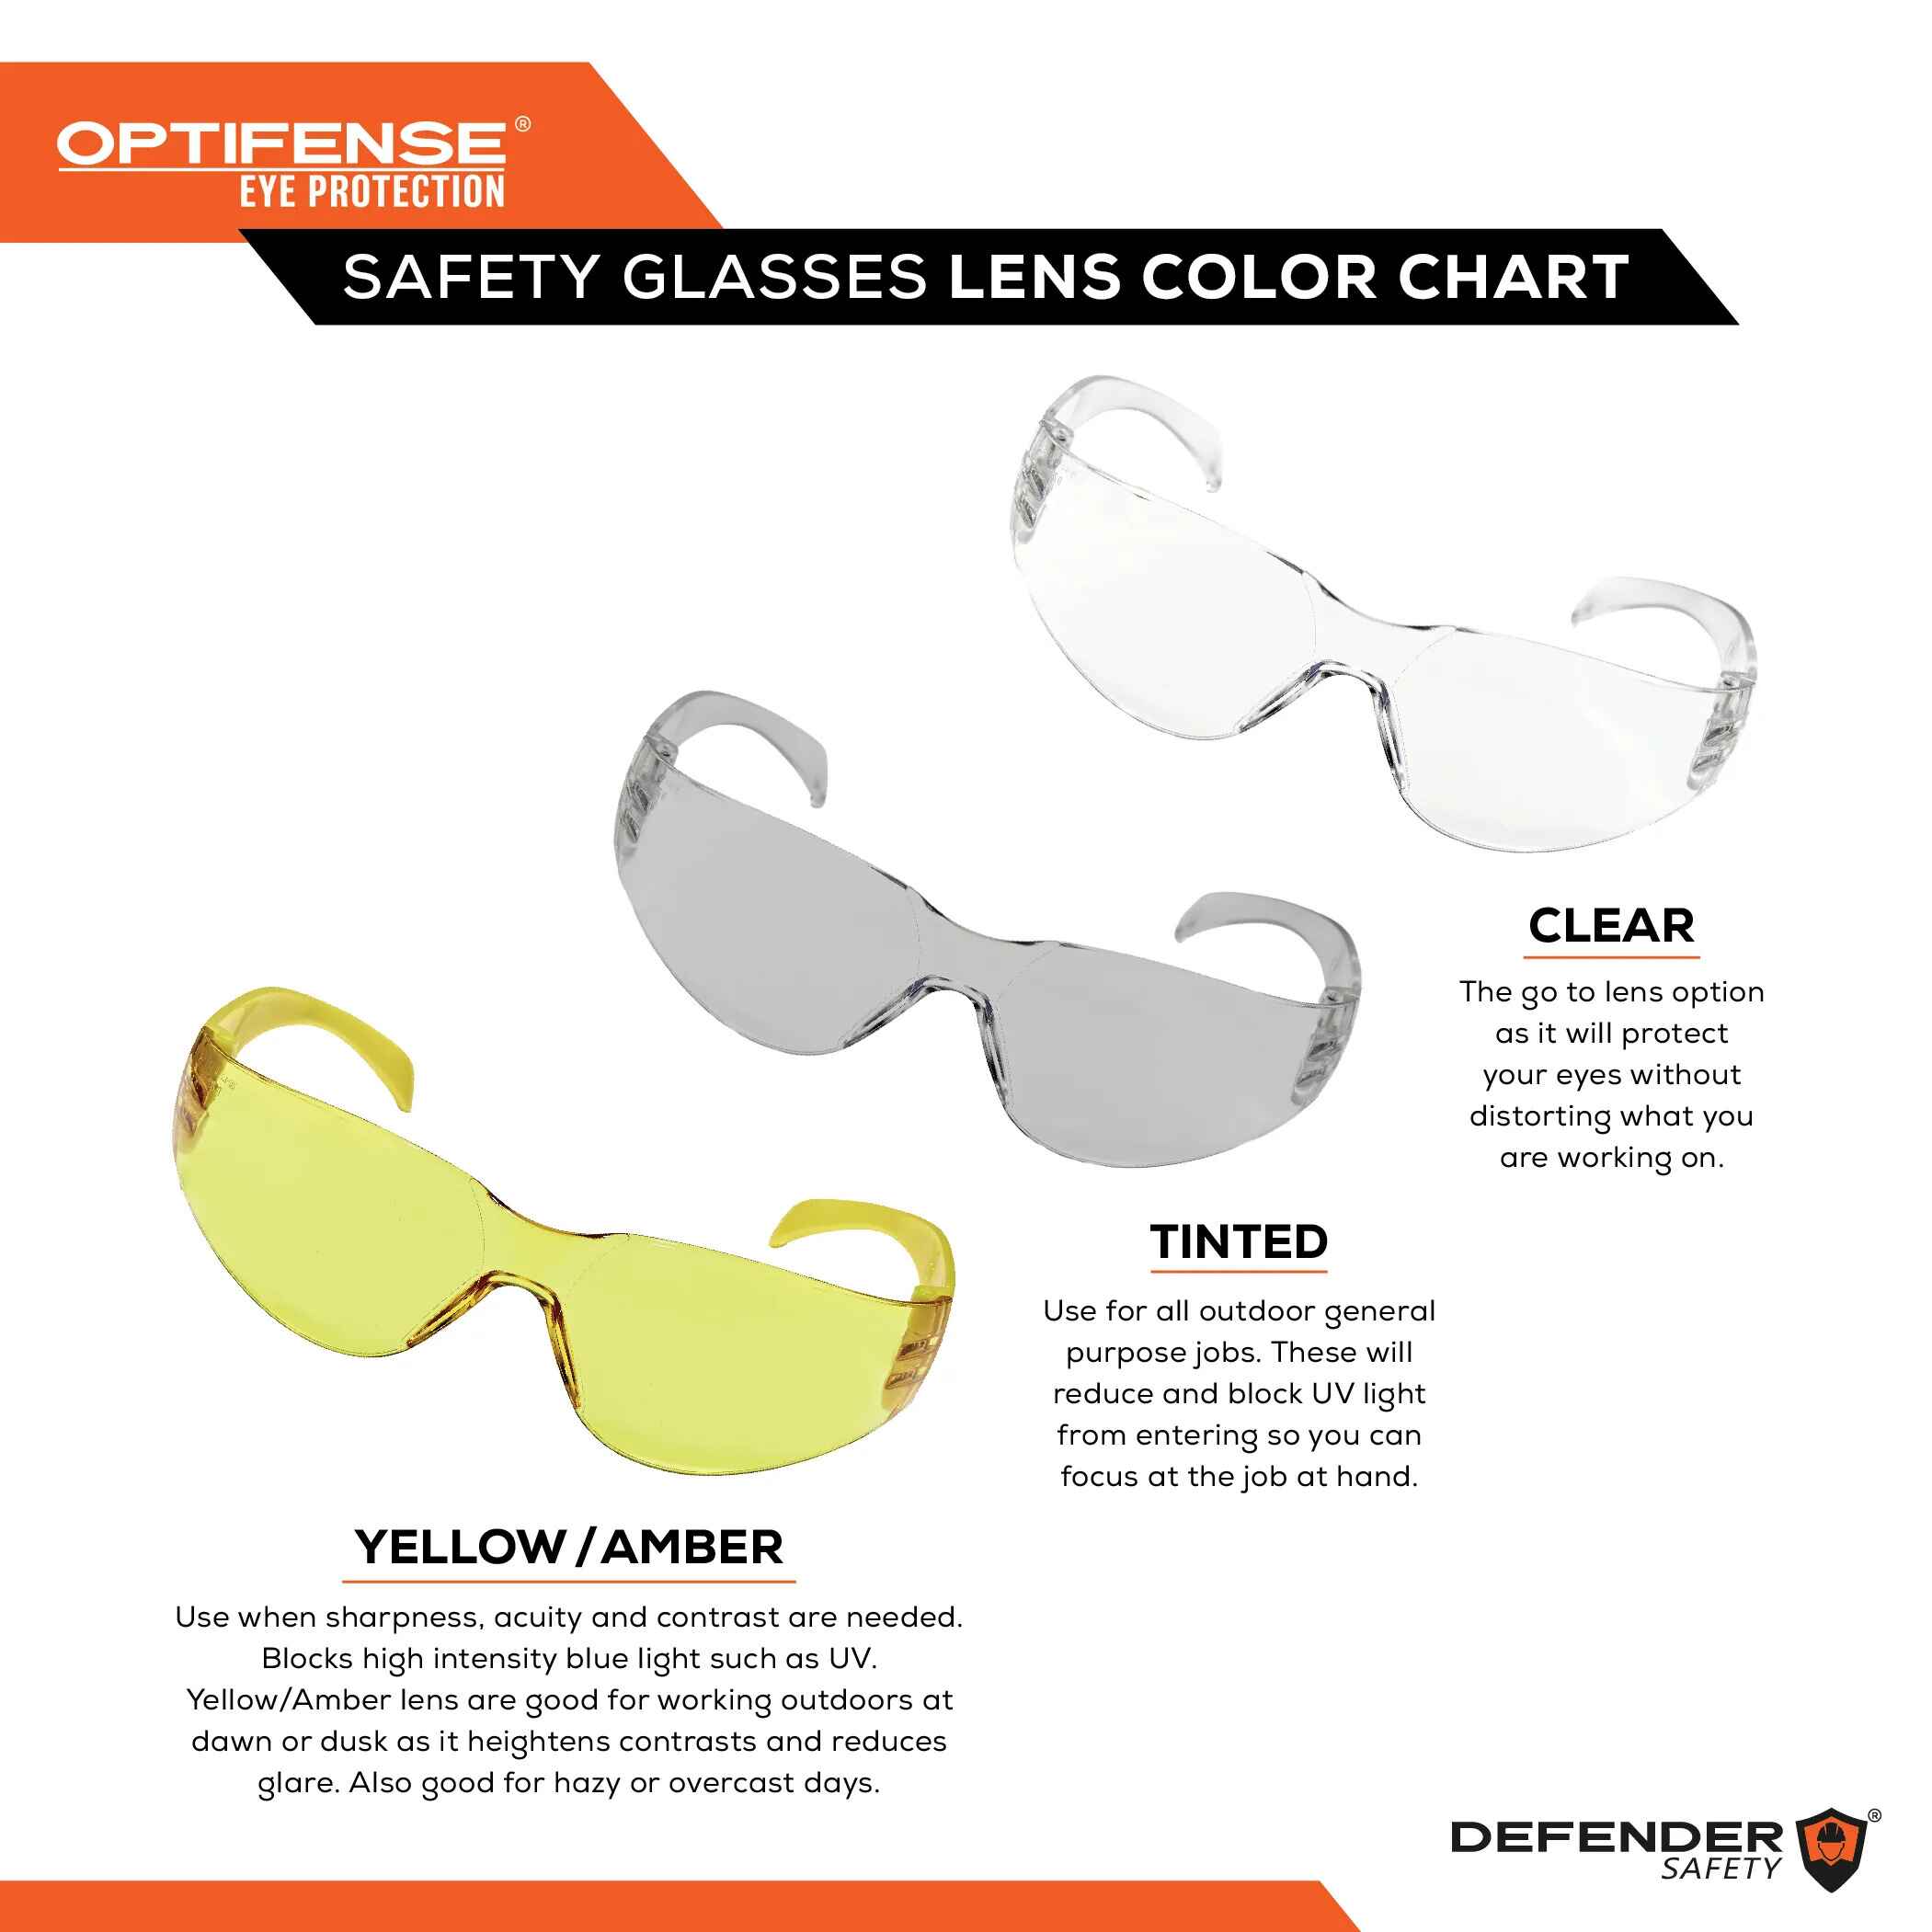 Safety Glasses, ANSI Z87+, Osha Approved, 30pc per Box Defender Safety, Optifense VS1 Clear, Clear